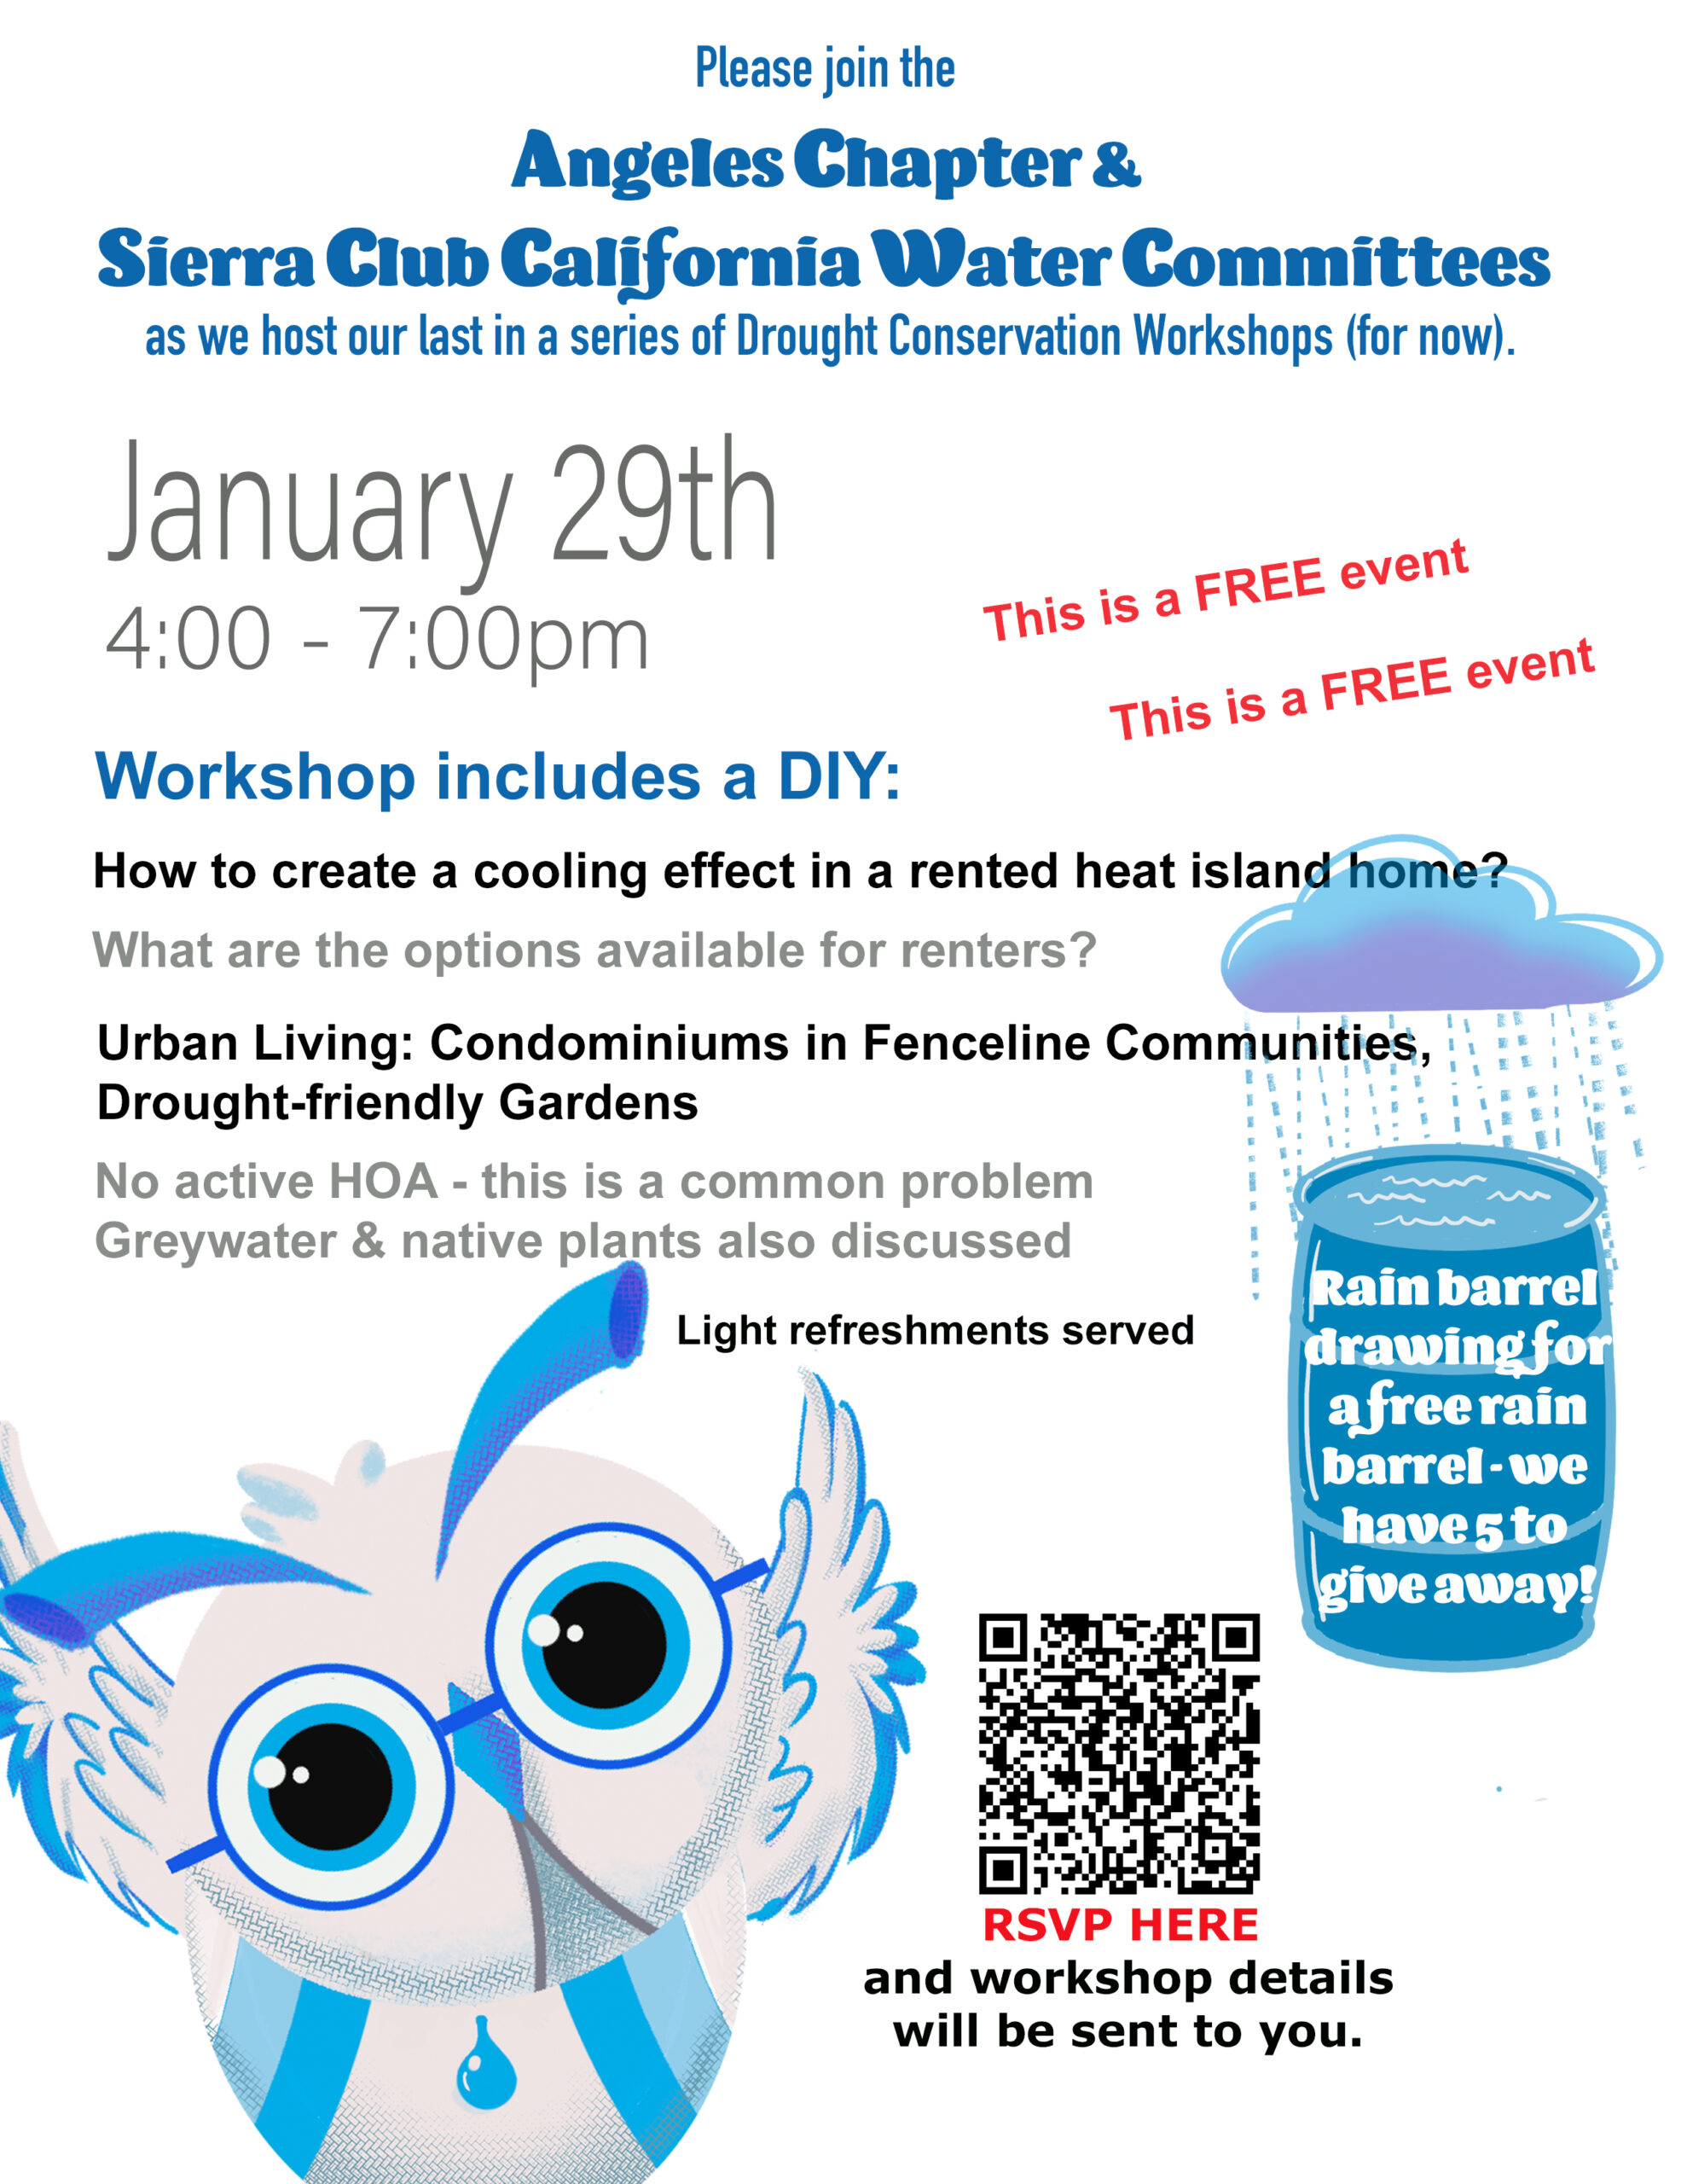 Flyer for January 29th 2023 Drought Conservation Workshop